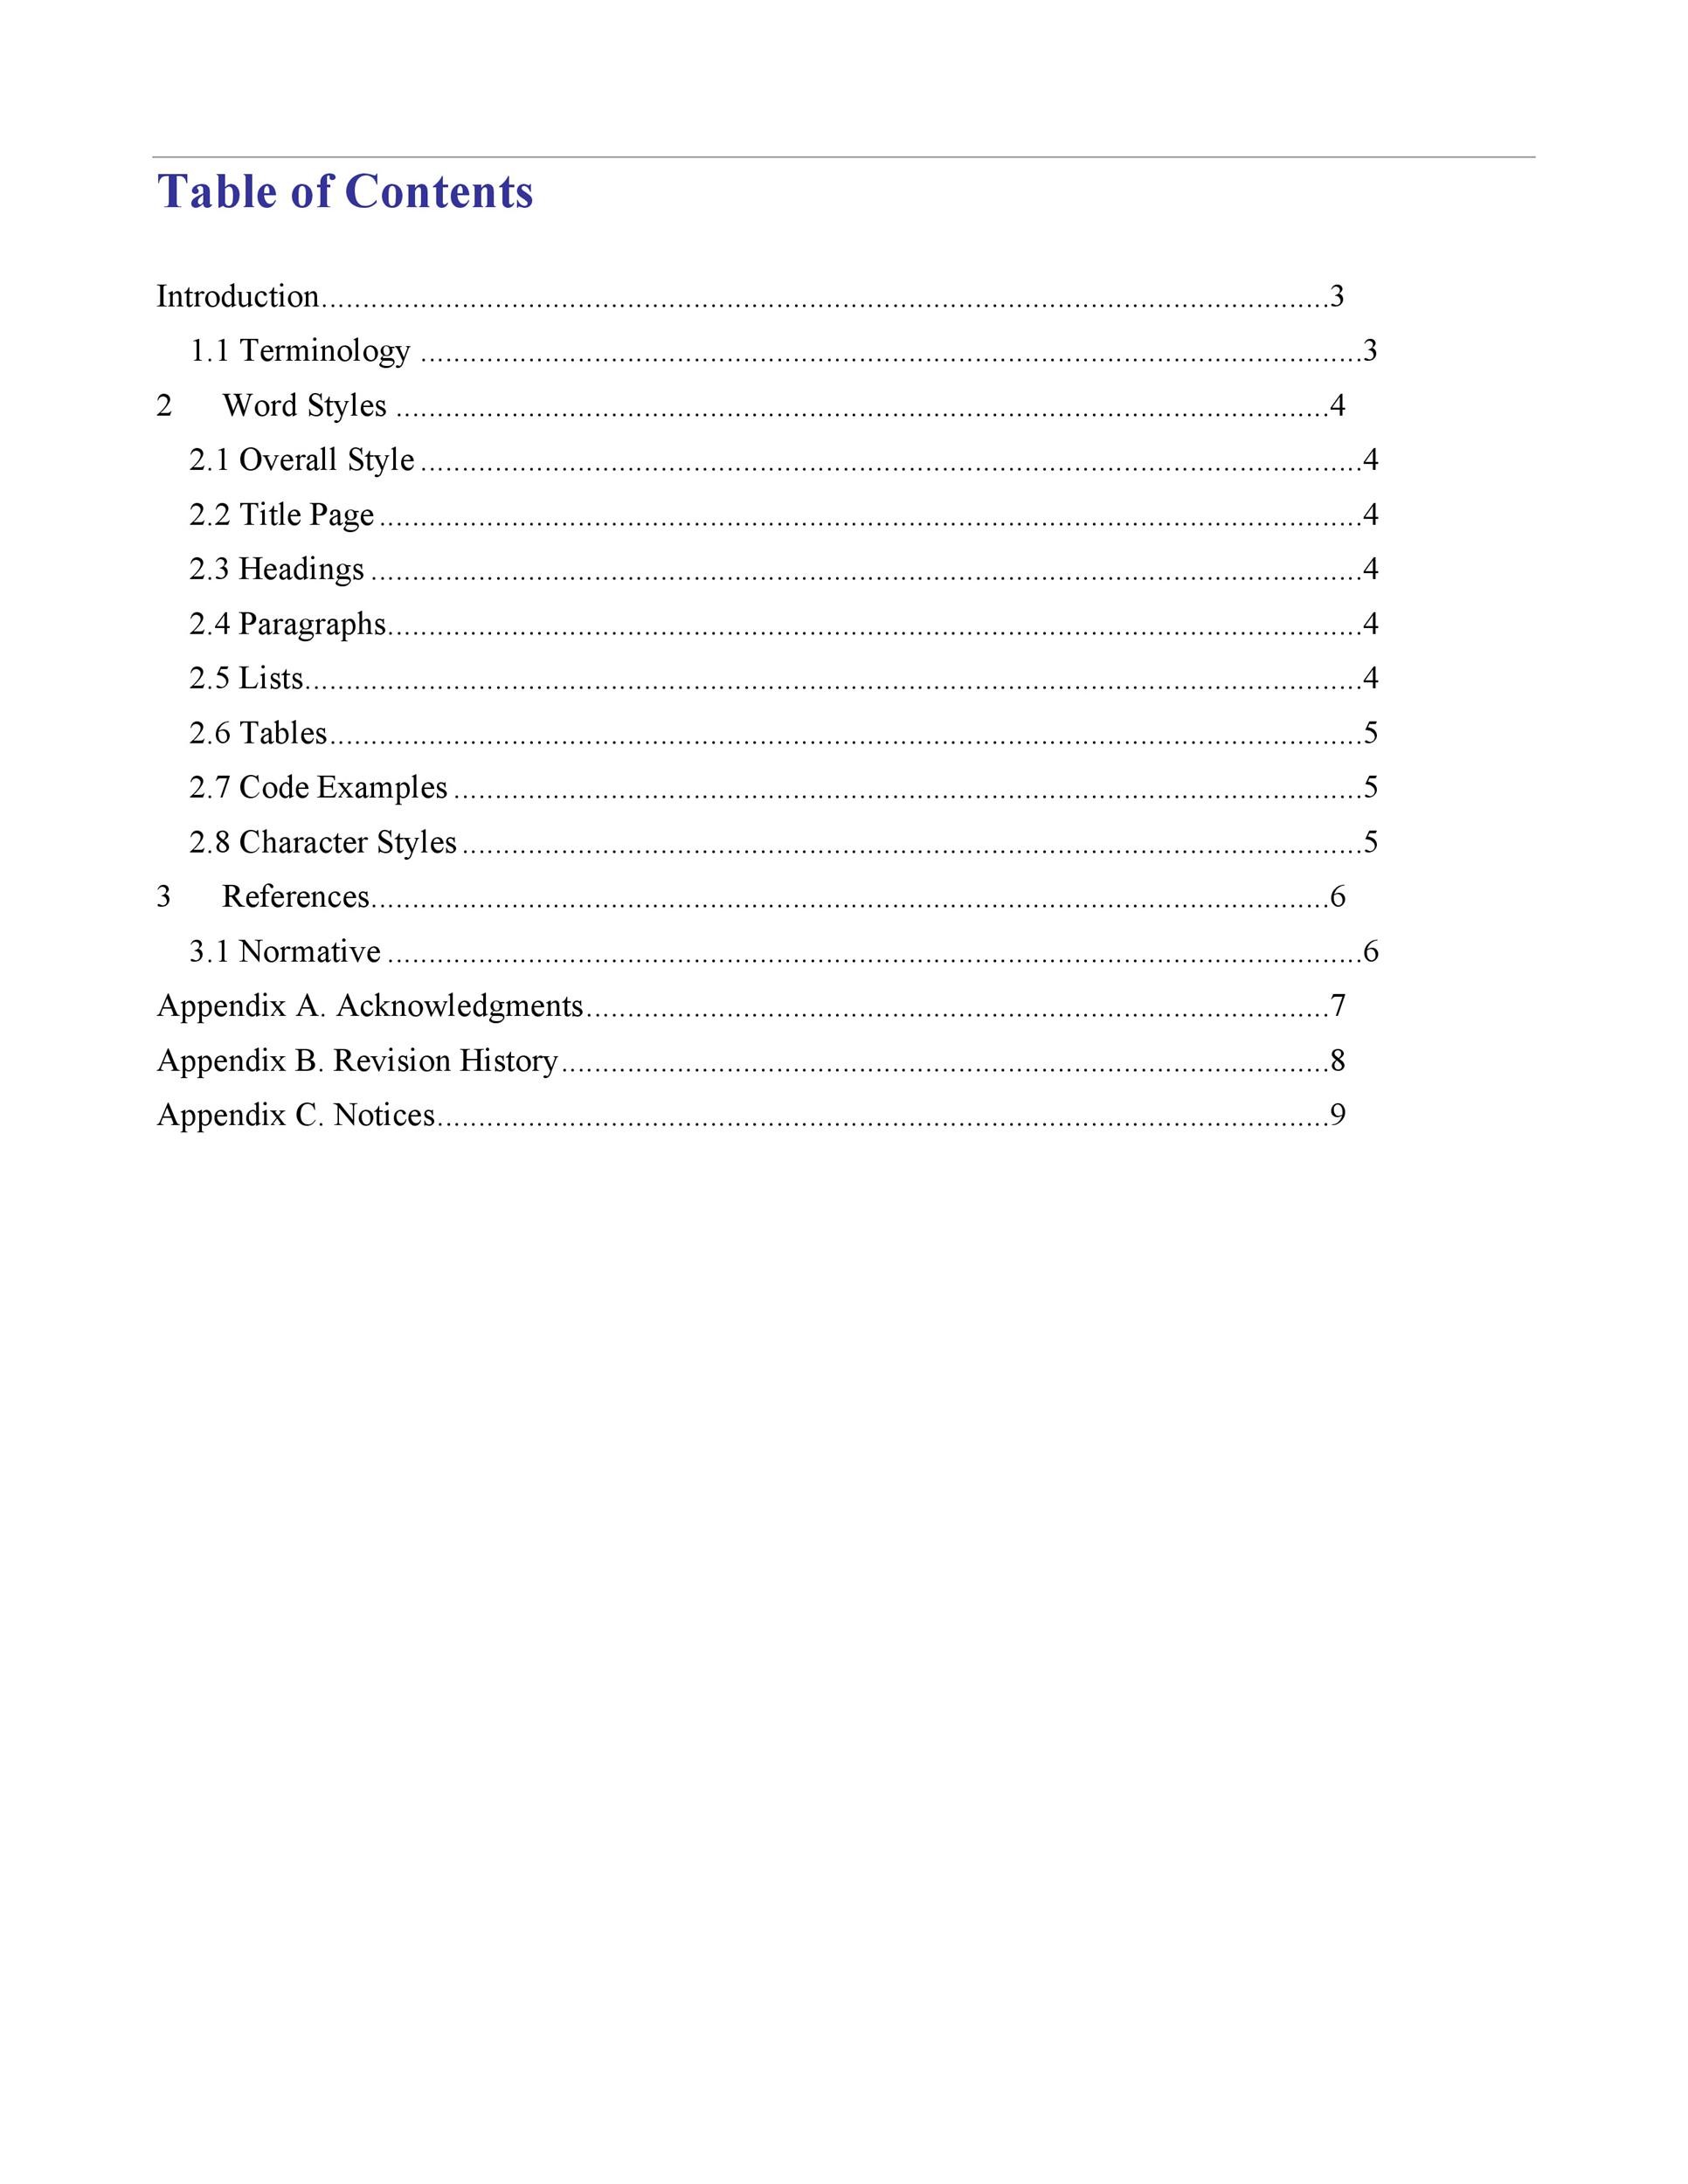 table-of-contents-apa-style-example